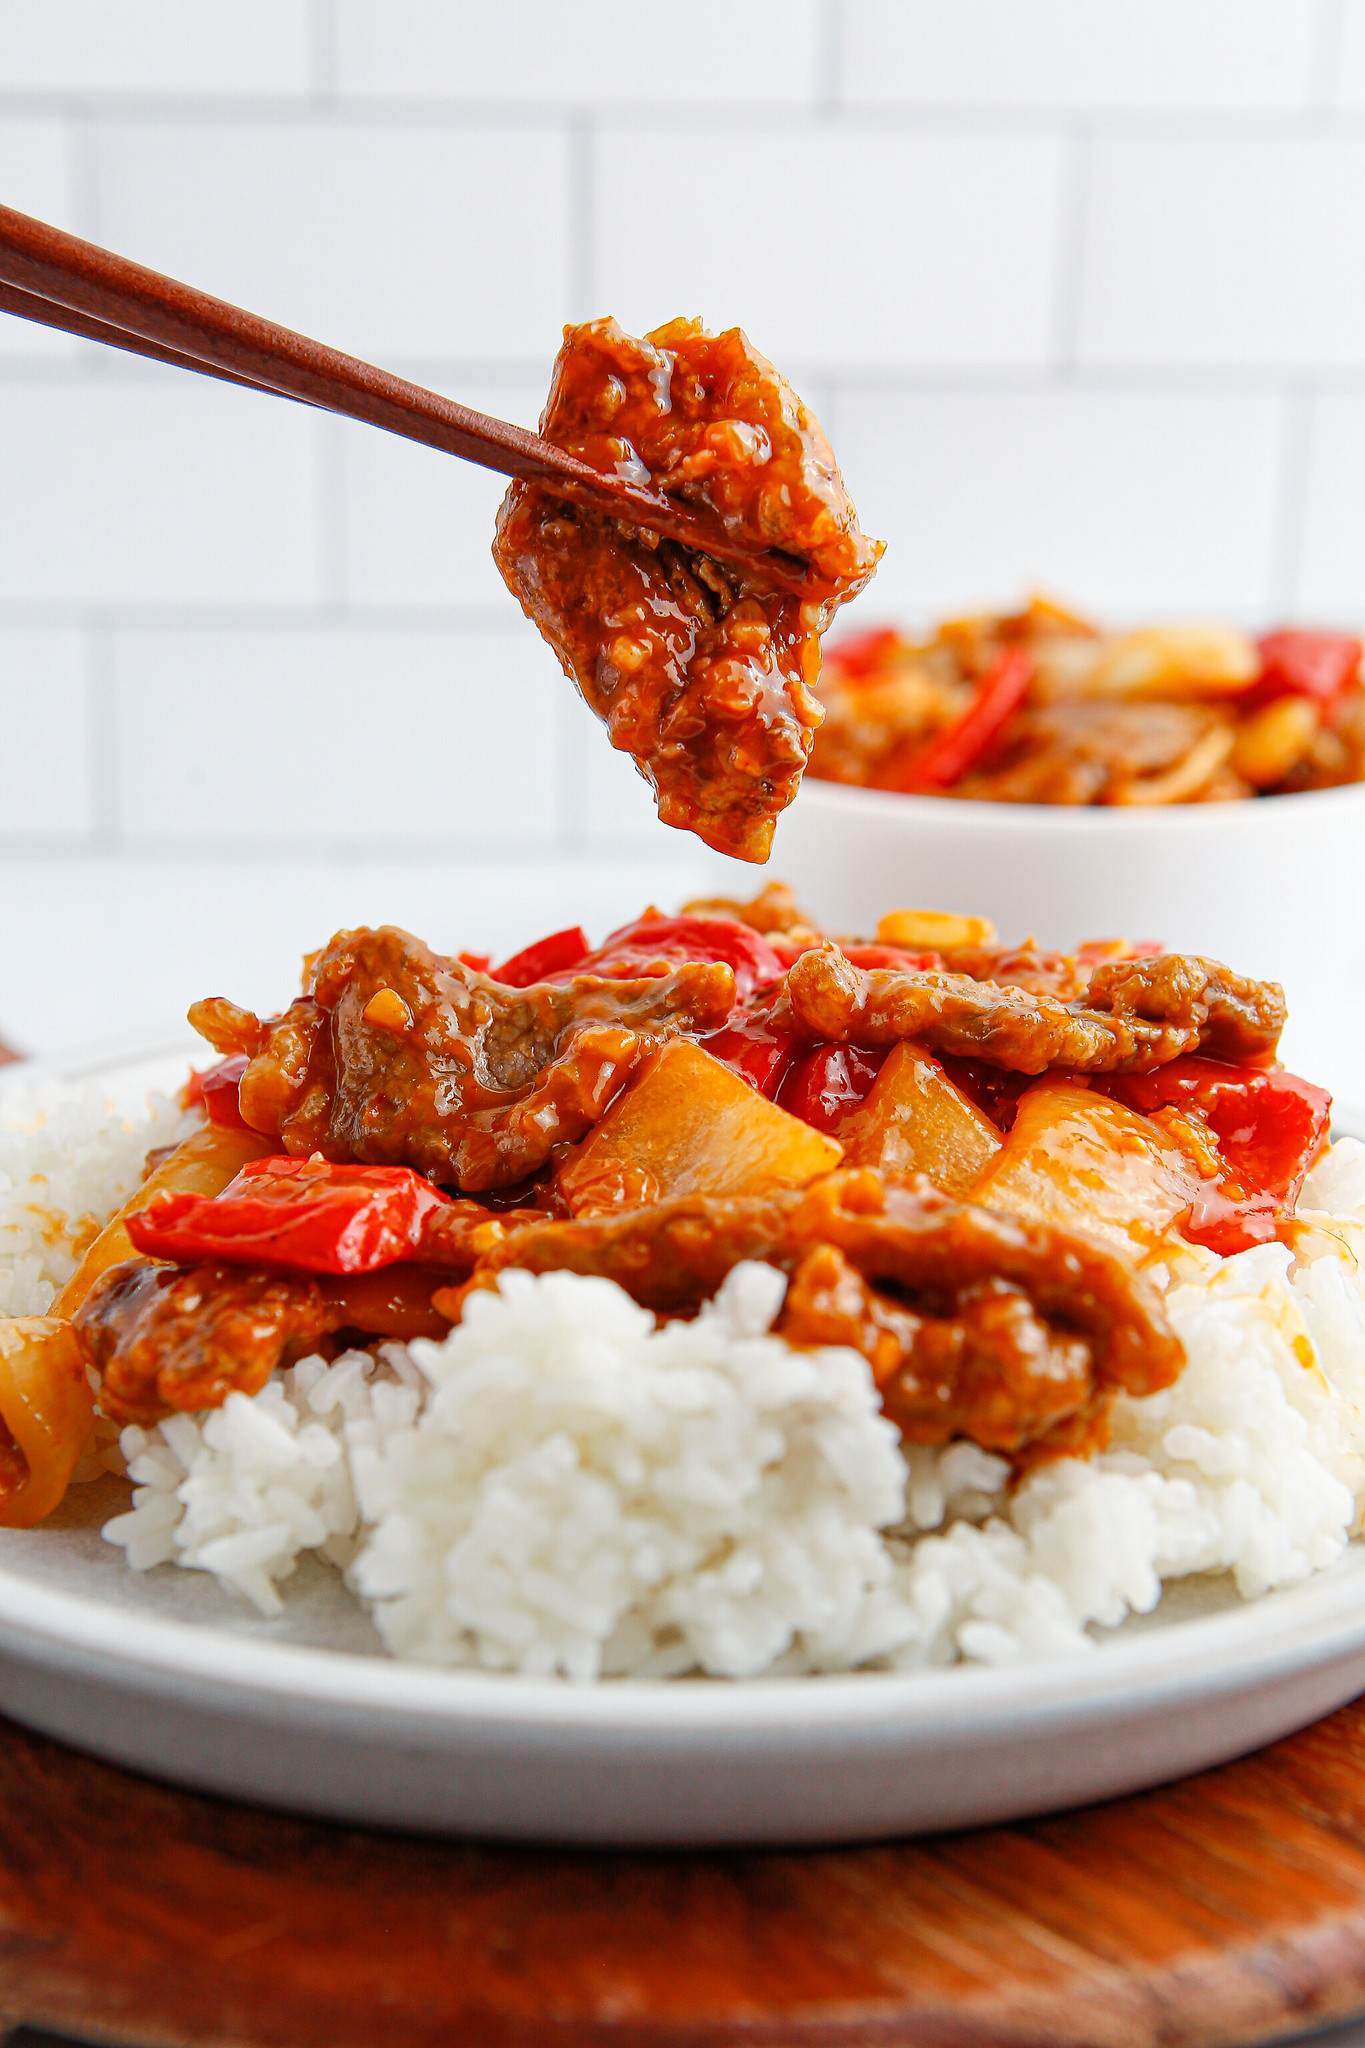 Stir fried beef, onions, and red bell peppers in a sweet and spicy sauce, served over white rice